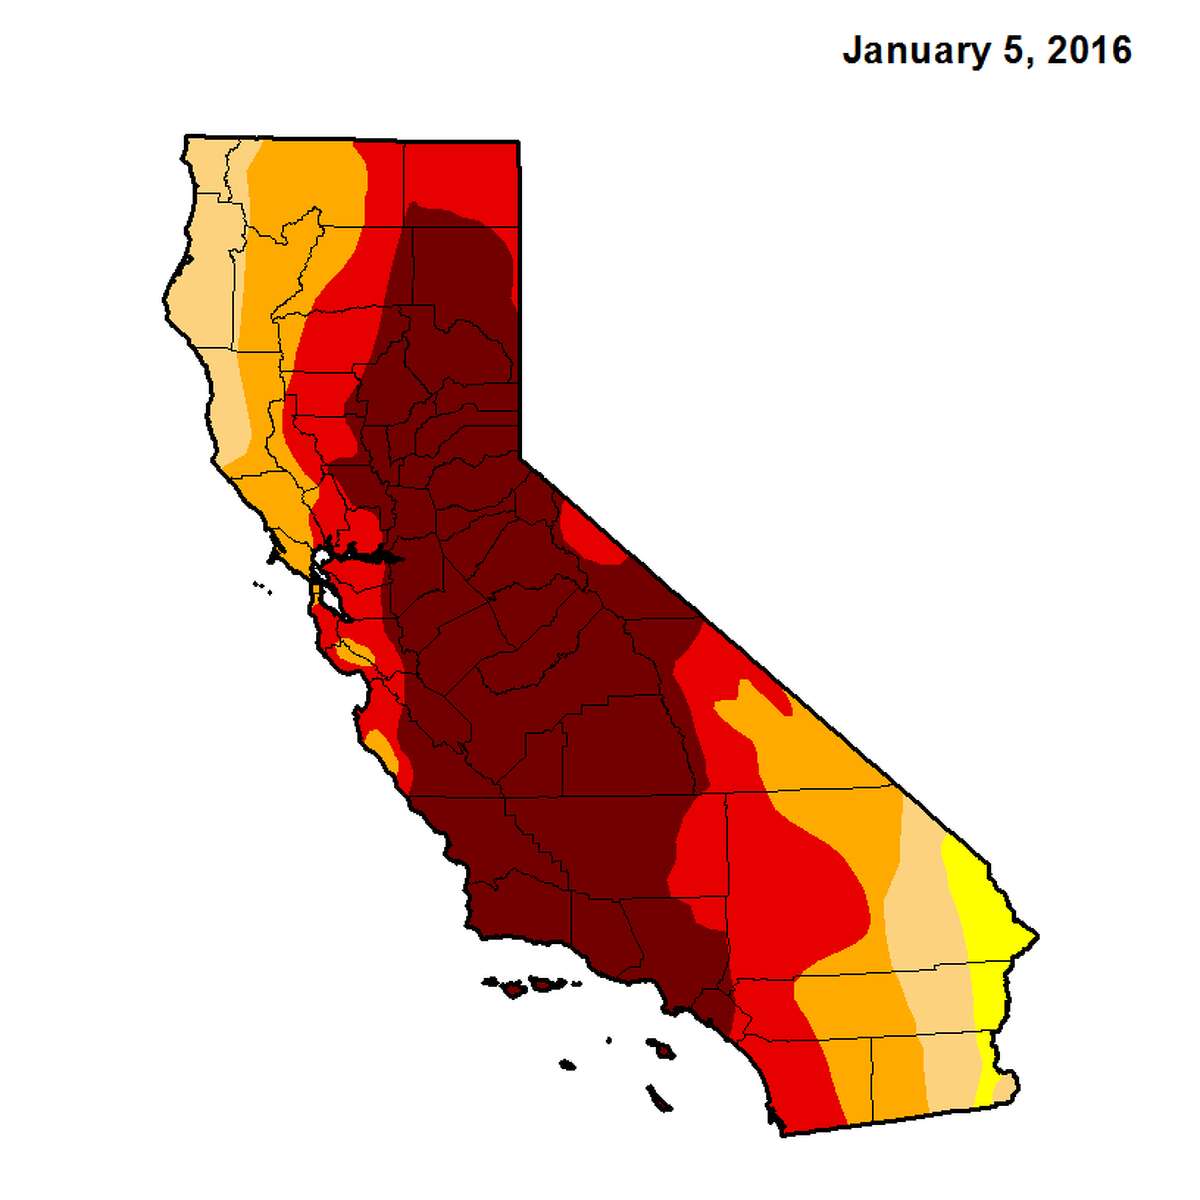 The California Drought monitor map showed a state mired with drought from the north to the south on Jan. 5, 2016.